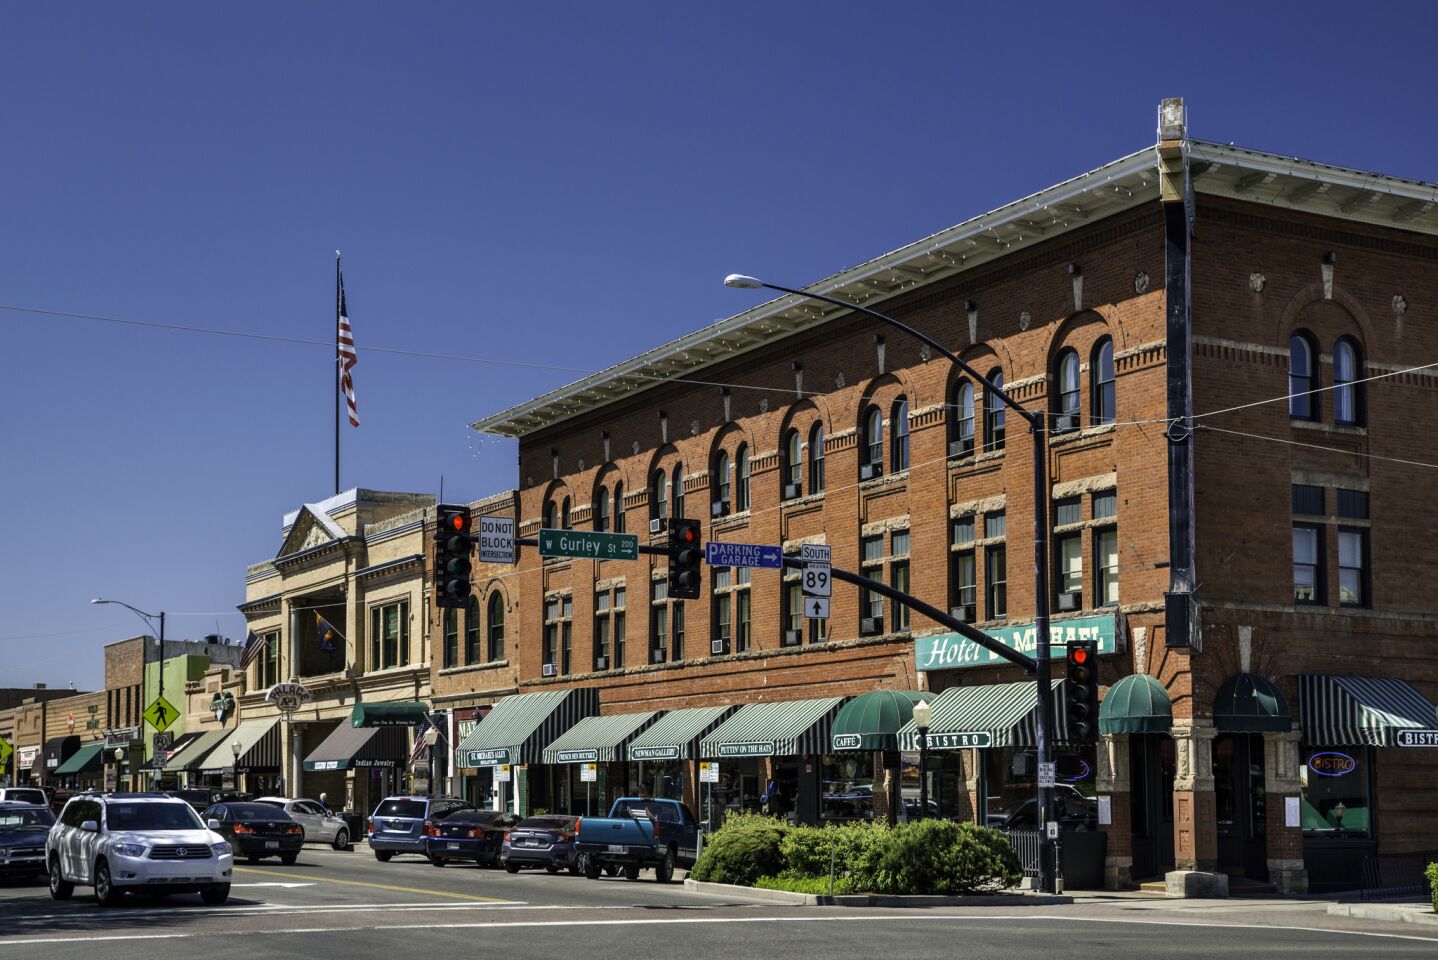 Hotel St. Michael is on Whiskey Row, which is lined with Old West-themed hotels and saloons.